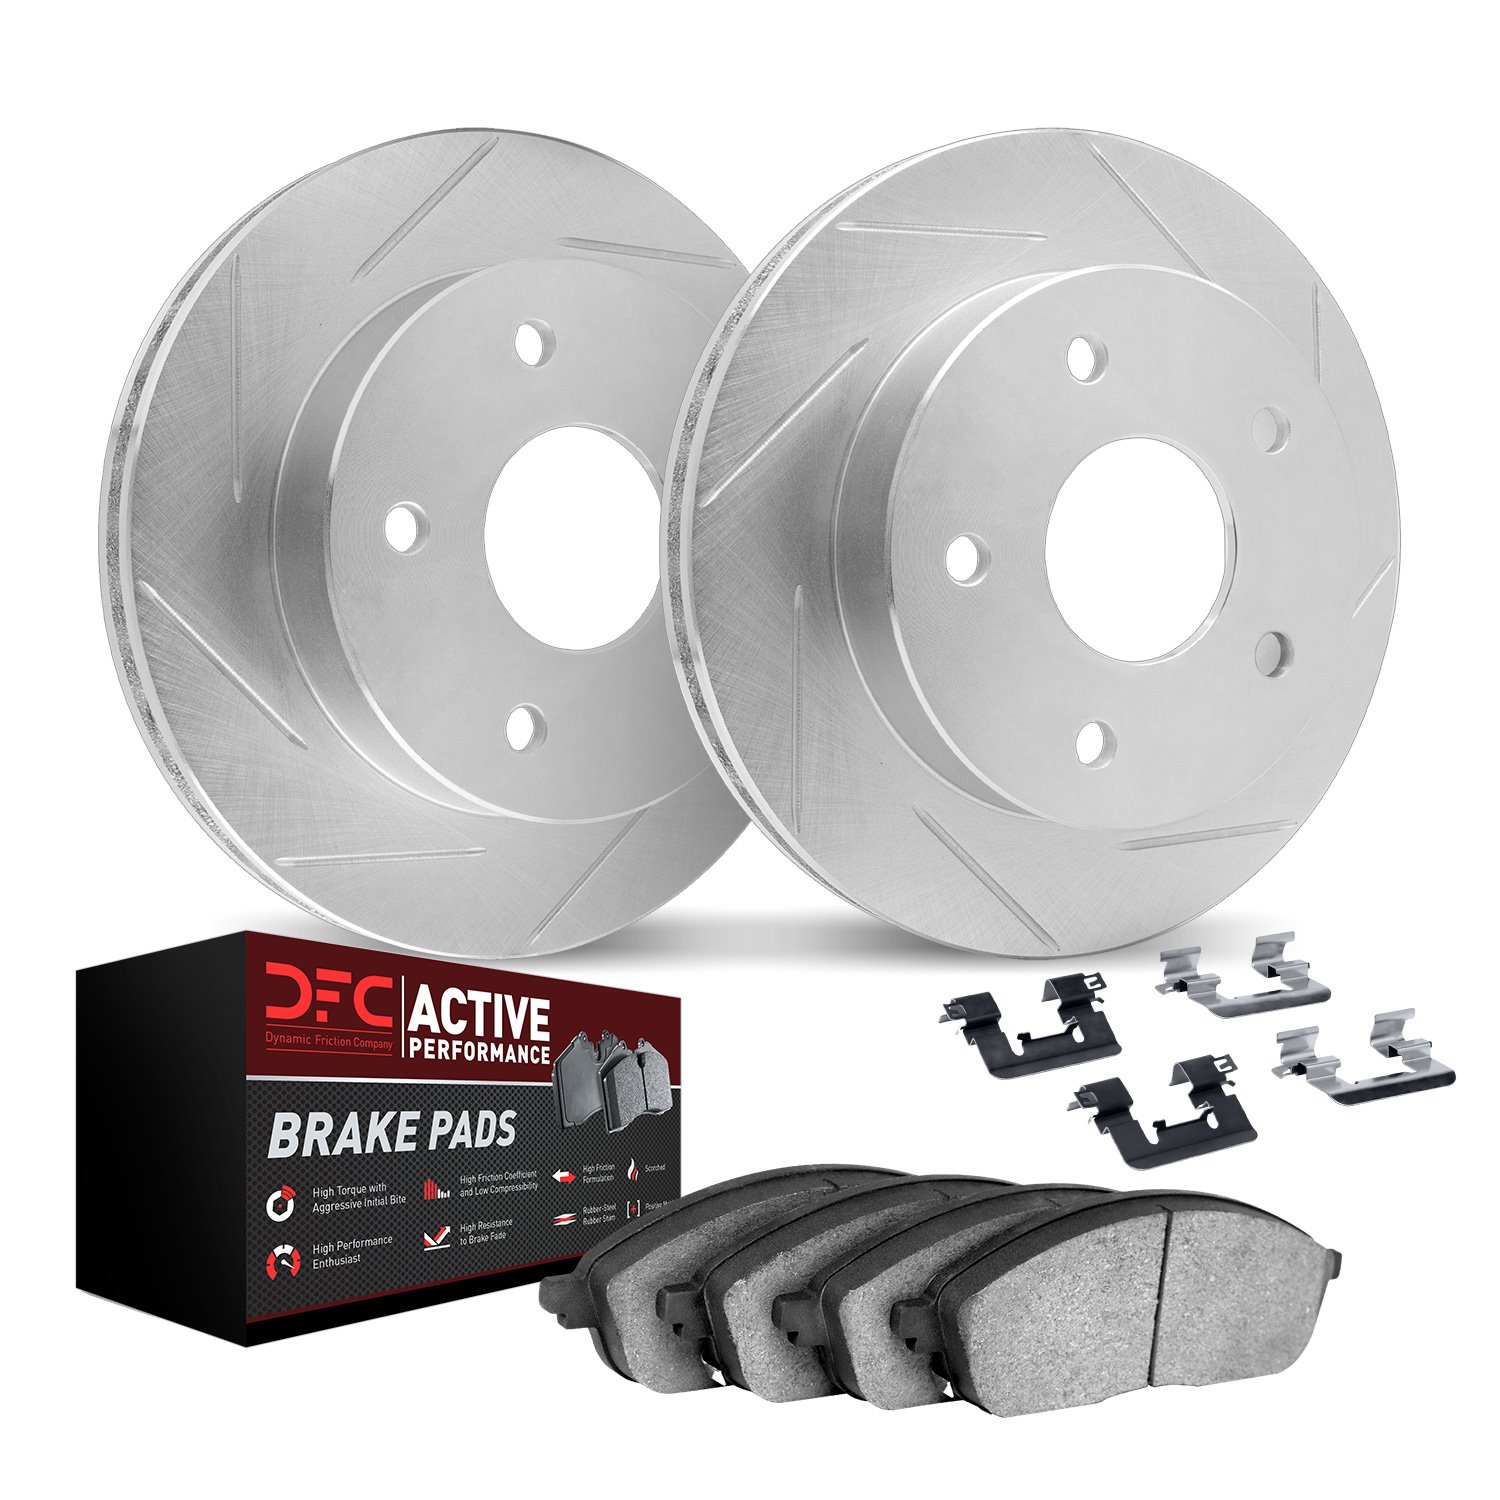 2712-59132 Geoperformance Slotted Brake Rotors with Active Performance Pads Kits & Hardware, Fits Select Acura/Honda, Position: